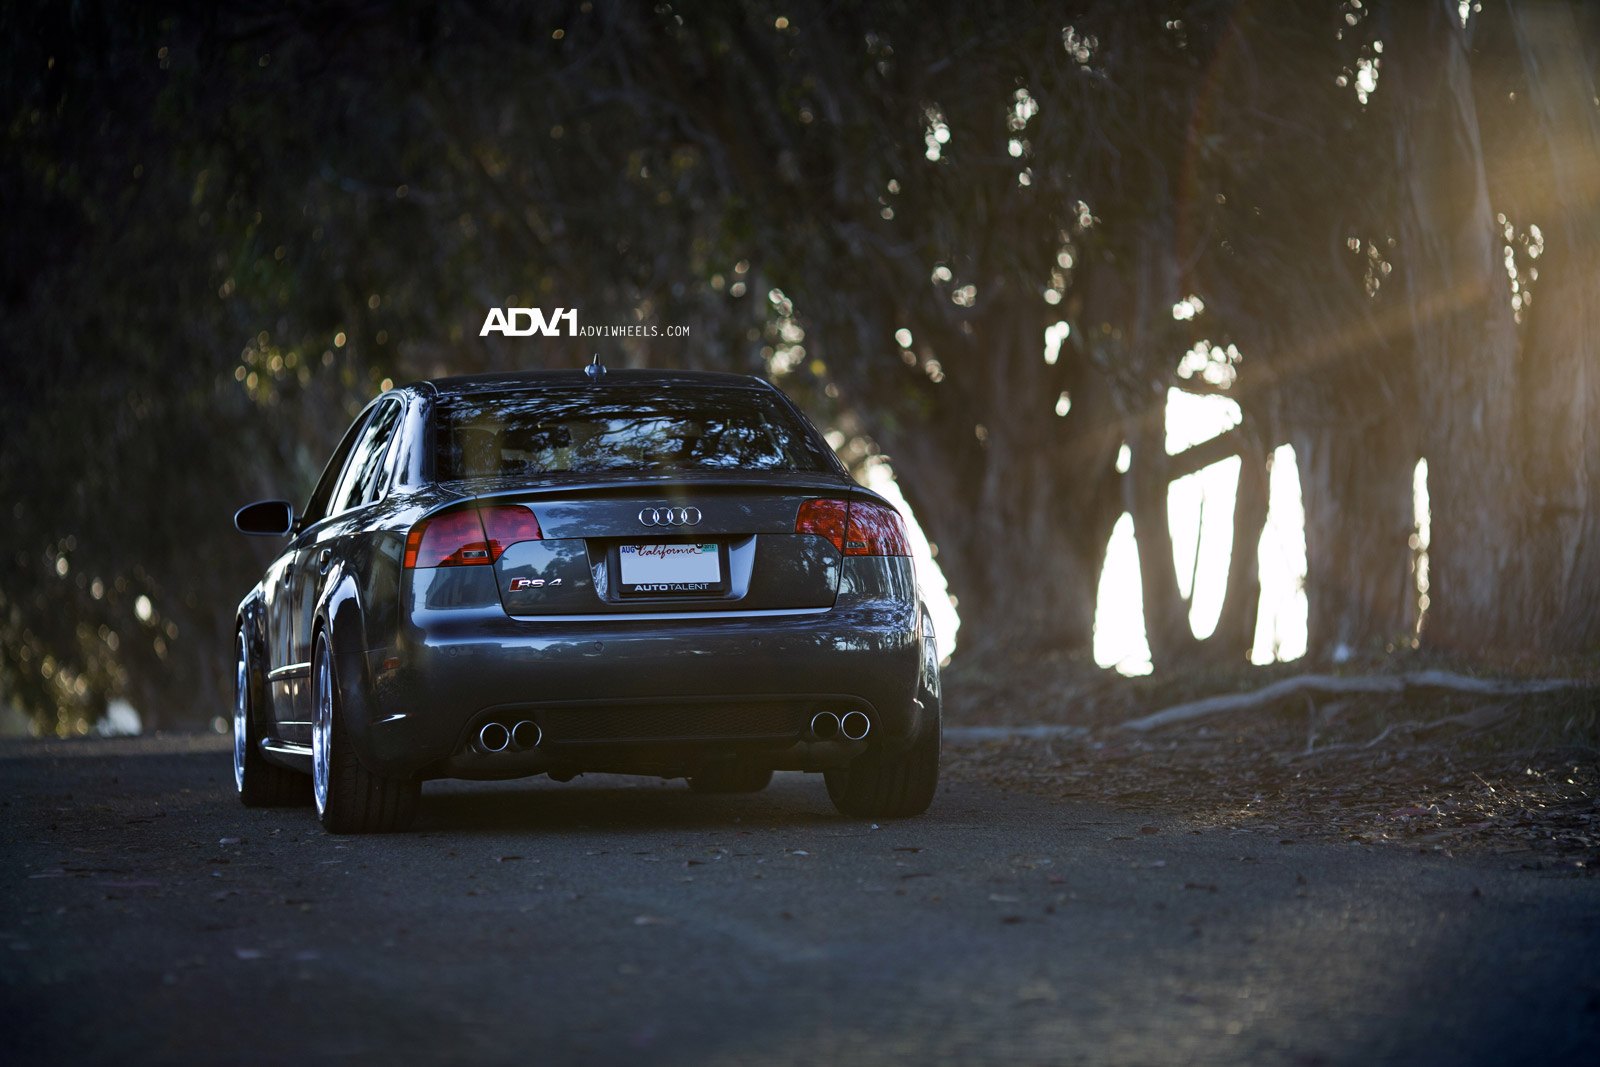 Aftermarket Exhaust System on Gray Audi RS4 - Photo by ADV.1